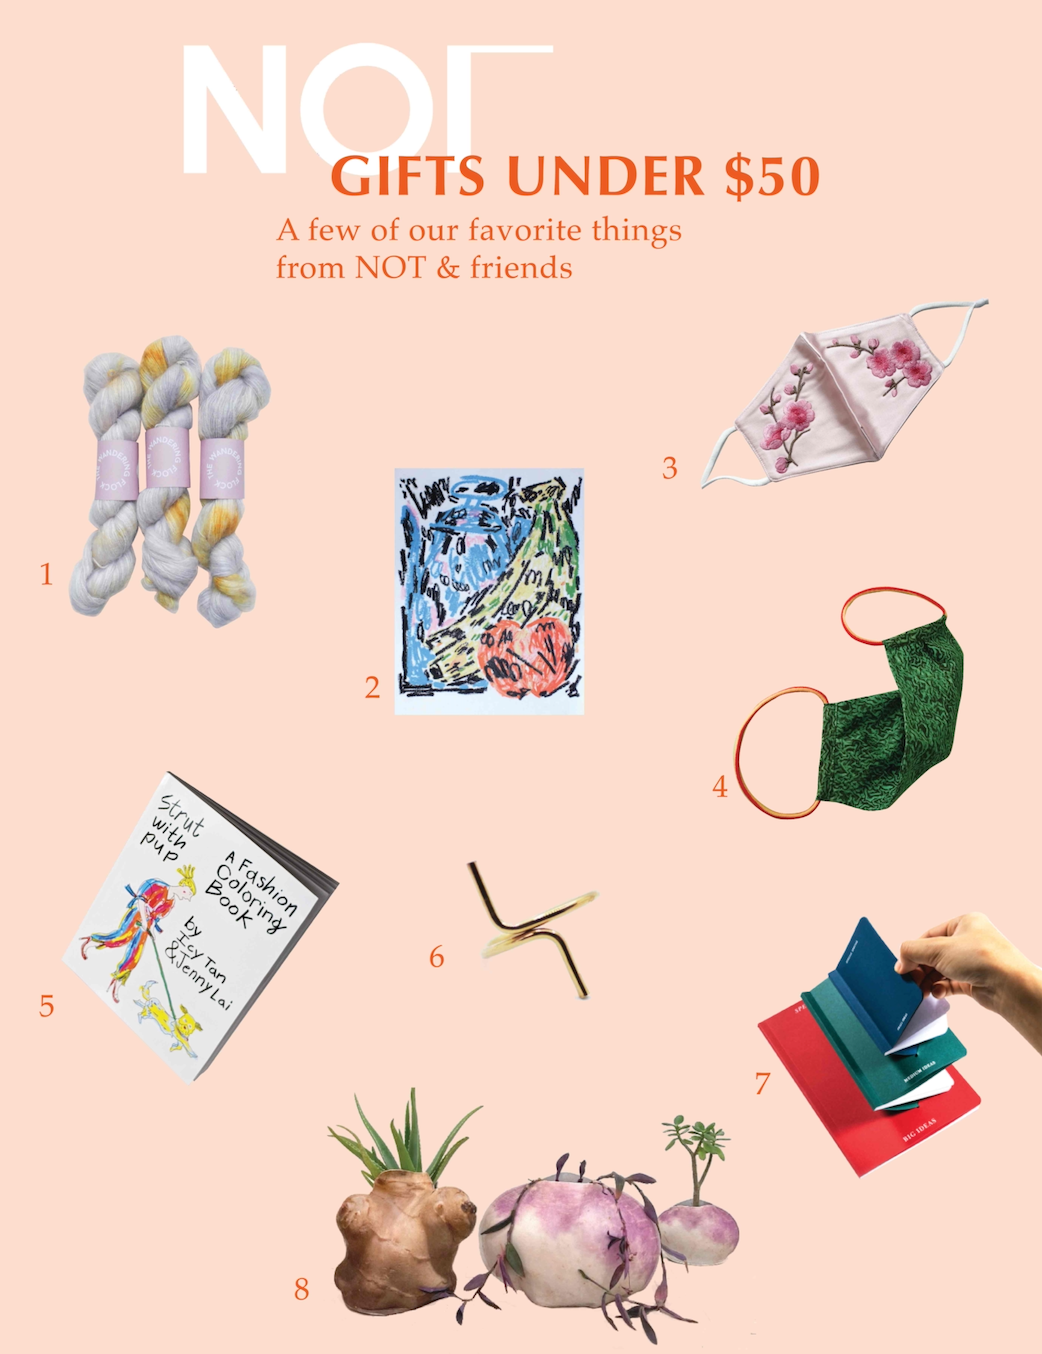 Gifts under $50 by NOT and friends